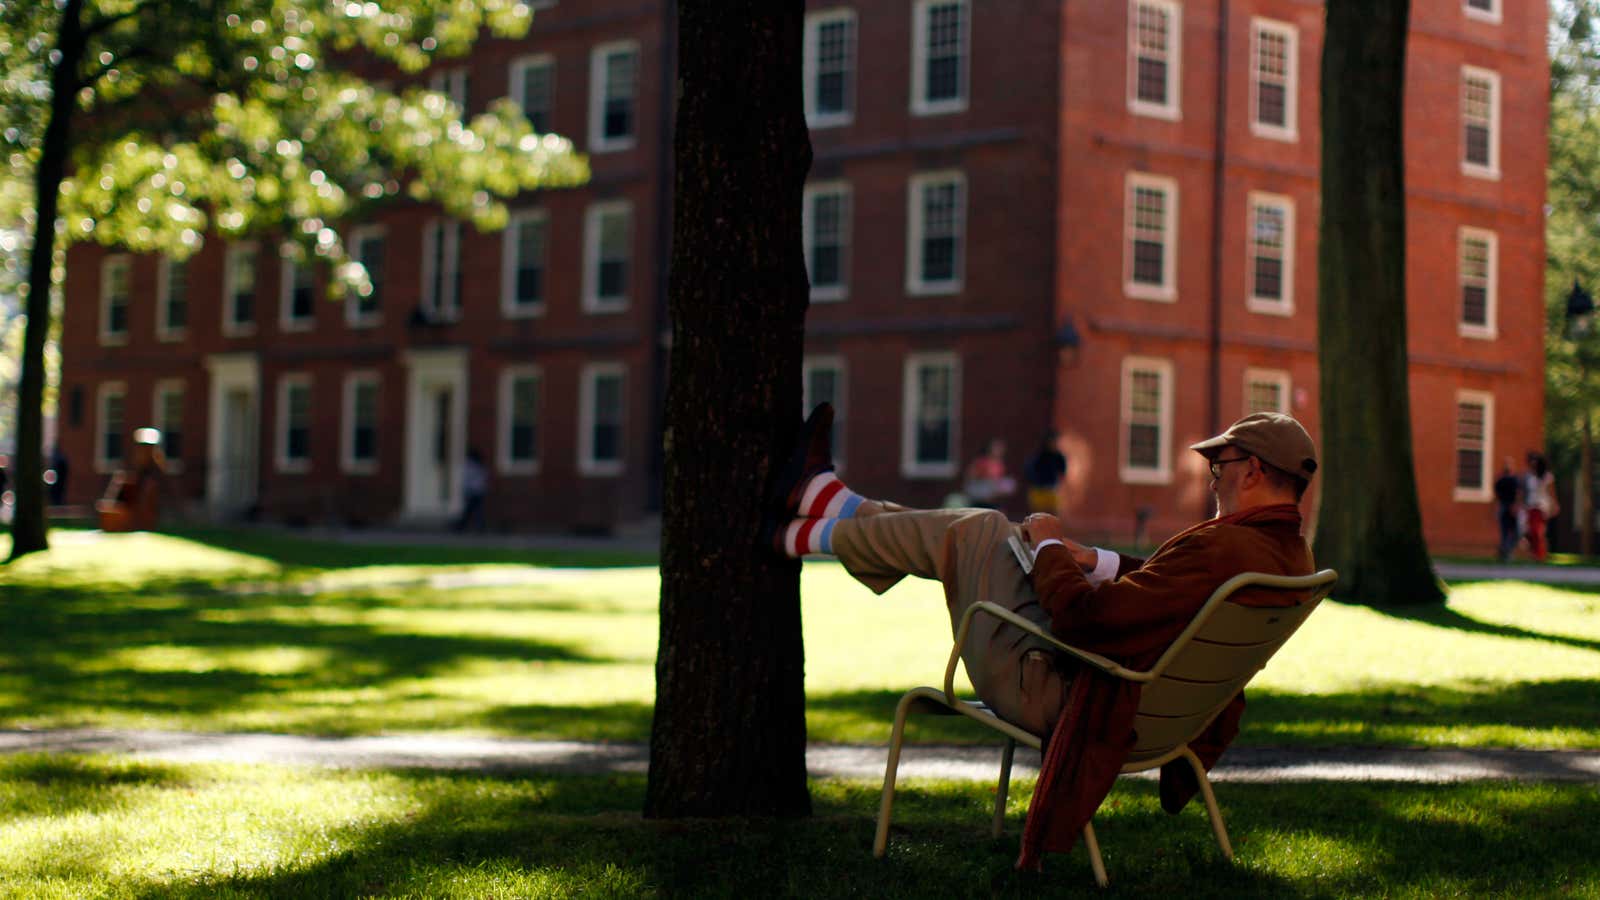 In Harvard Yard, they’re resting easy.